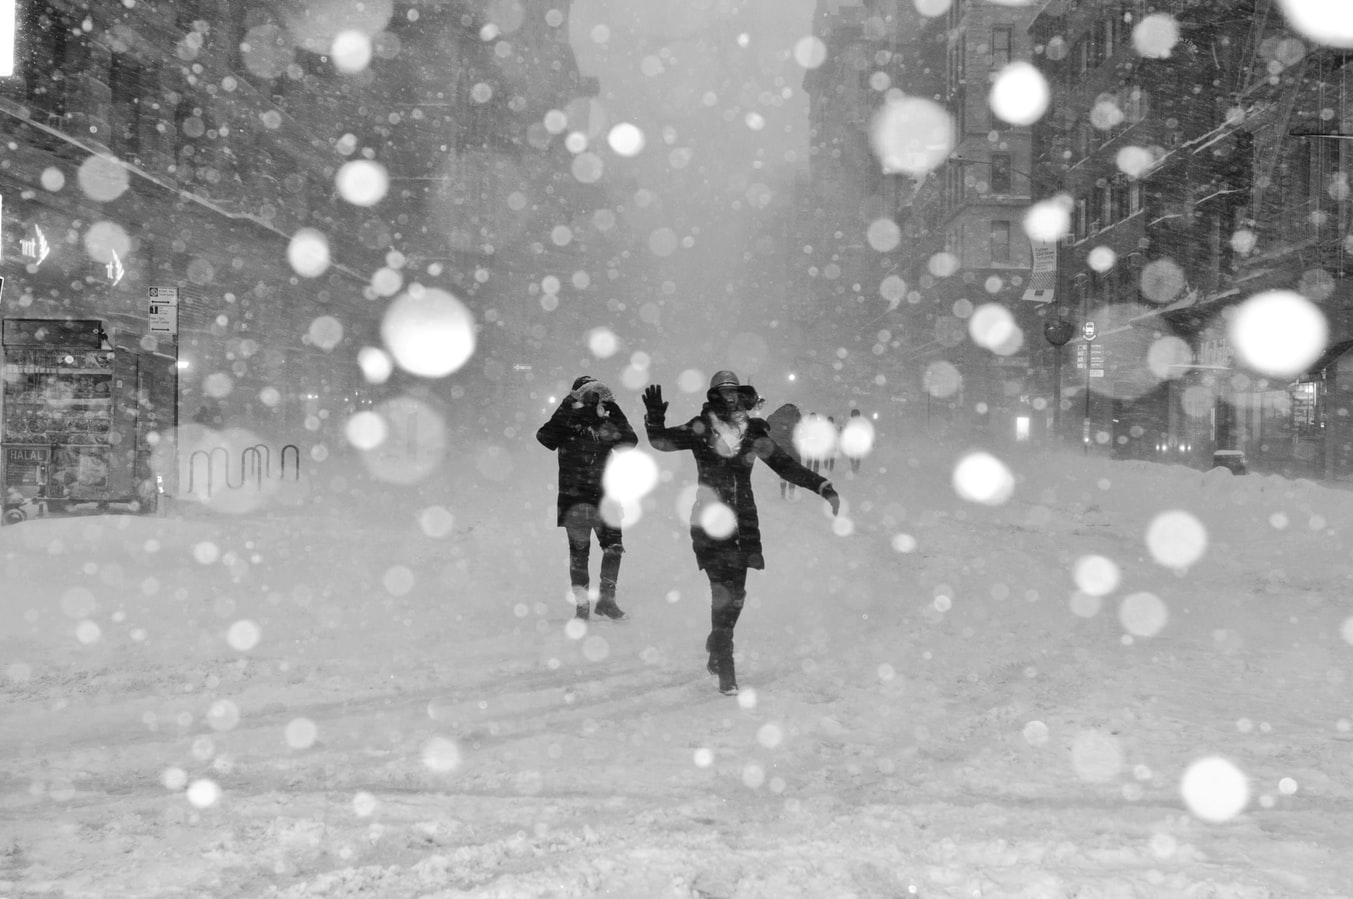 two people on a city street in a snow storm